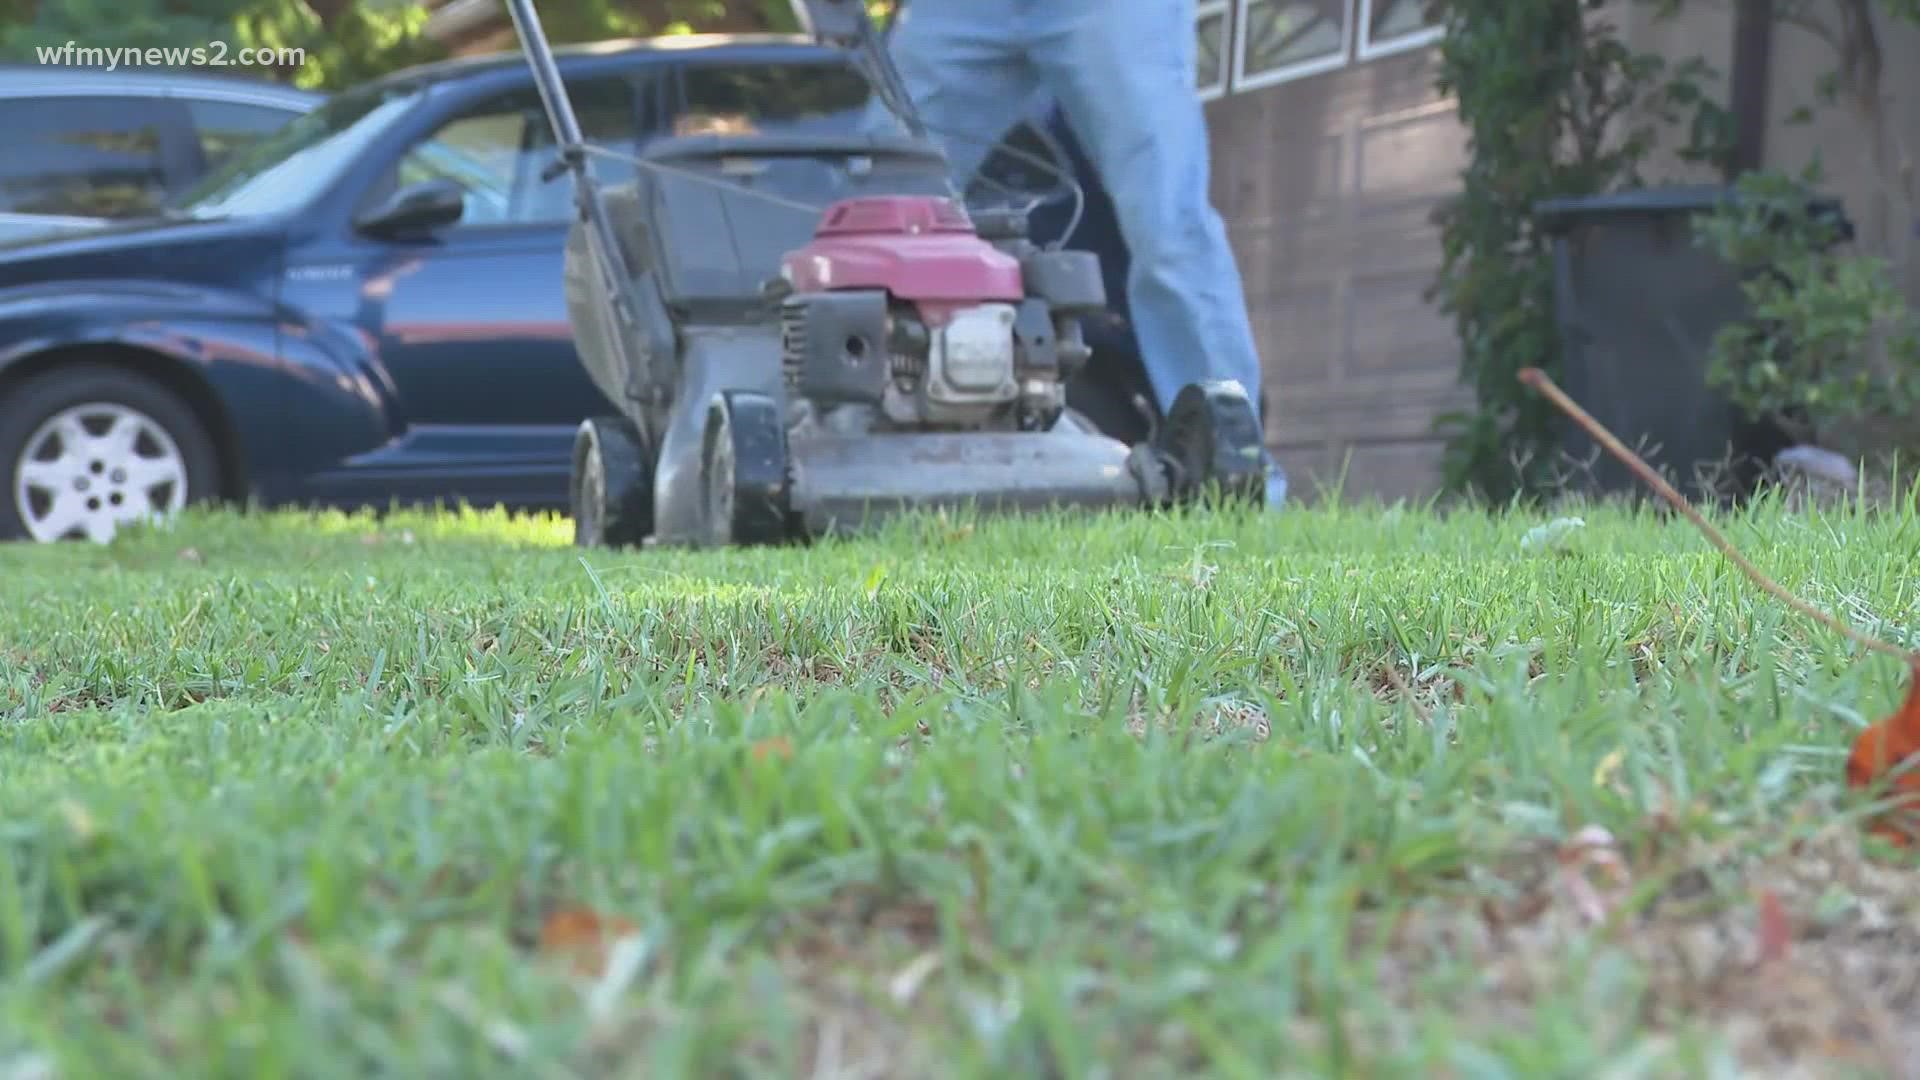 California is the first state to ban the sale of gas-powered lawnmowers by 2024.